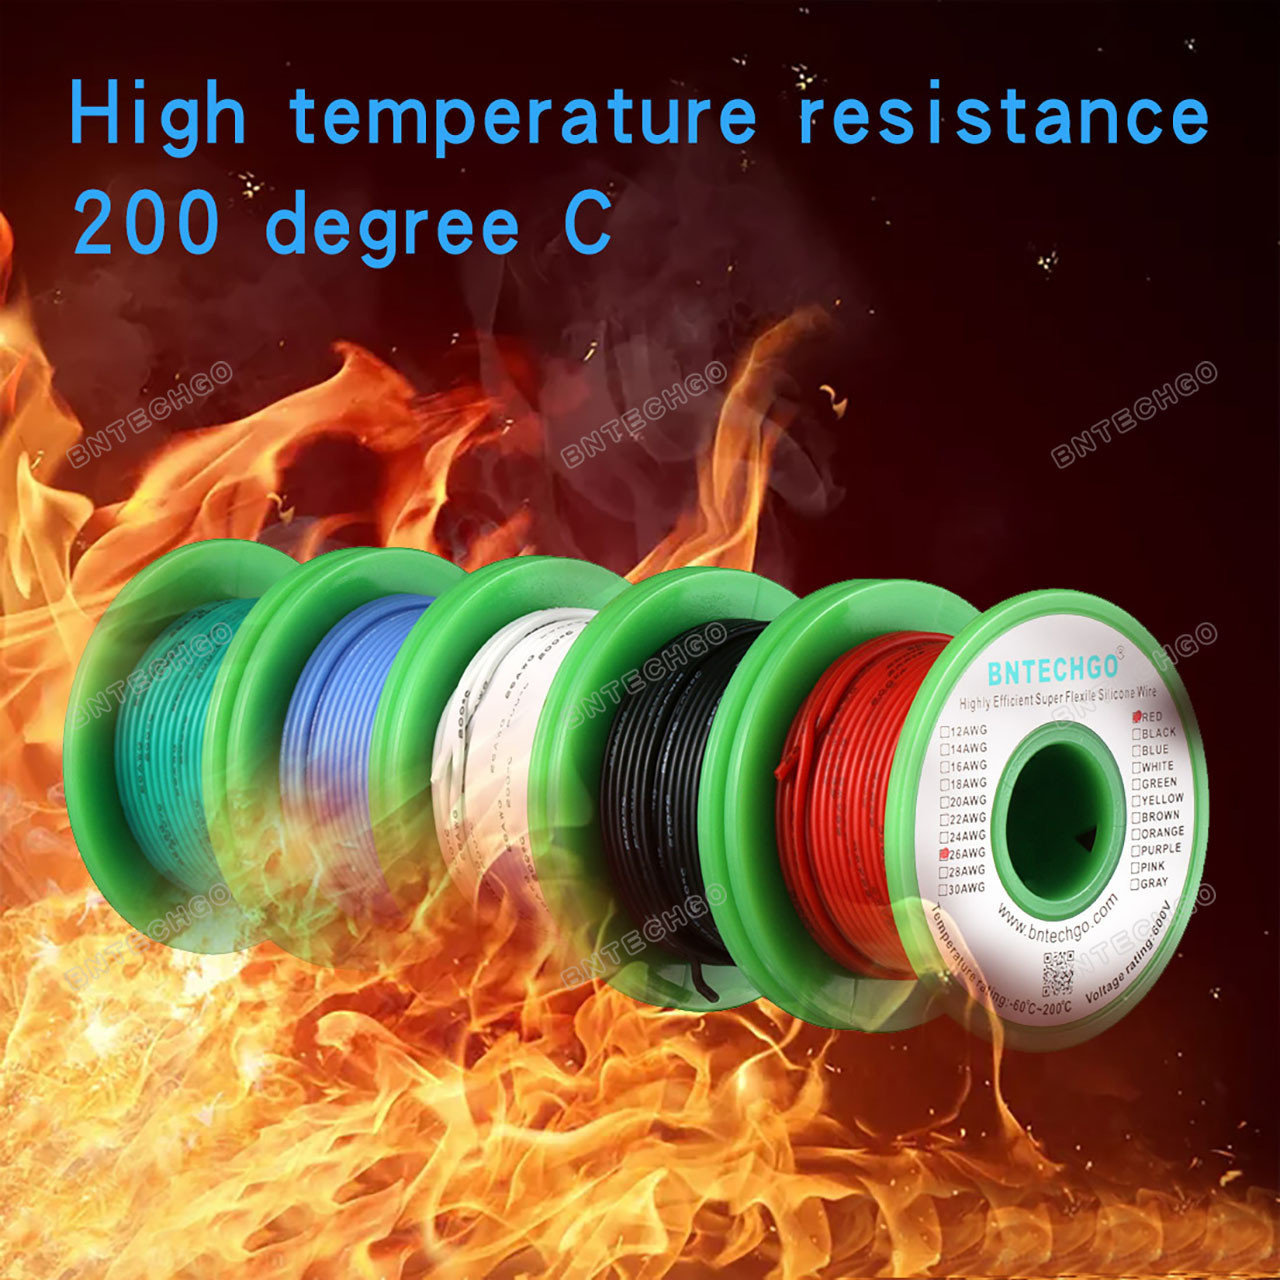 26awg silicone wire kit ultra flexible high resistant 200 deg c